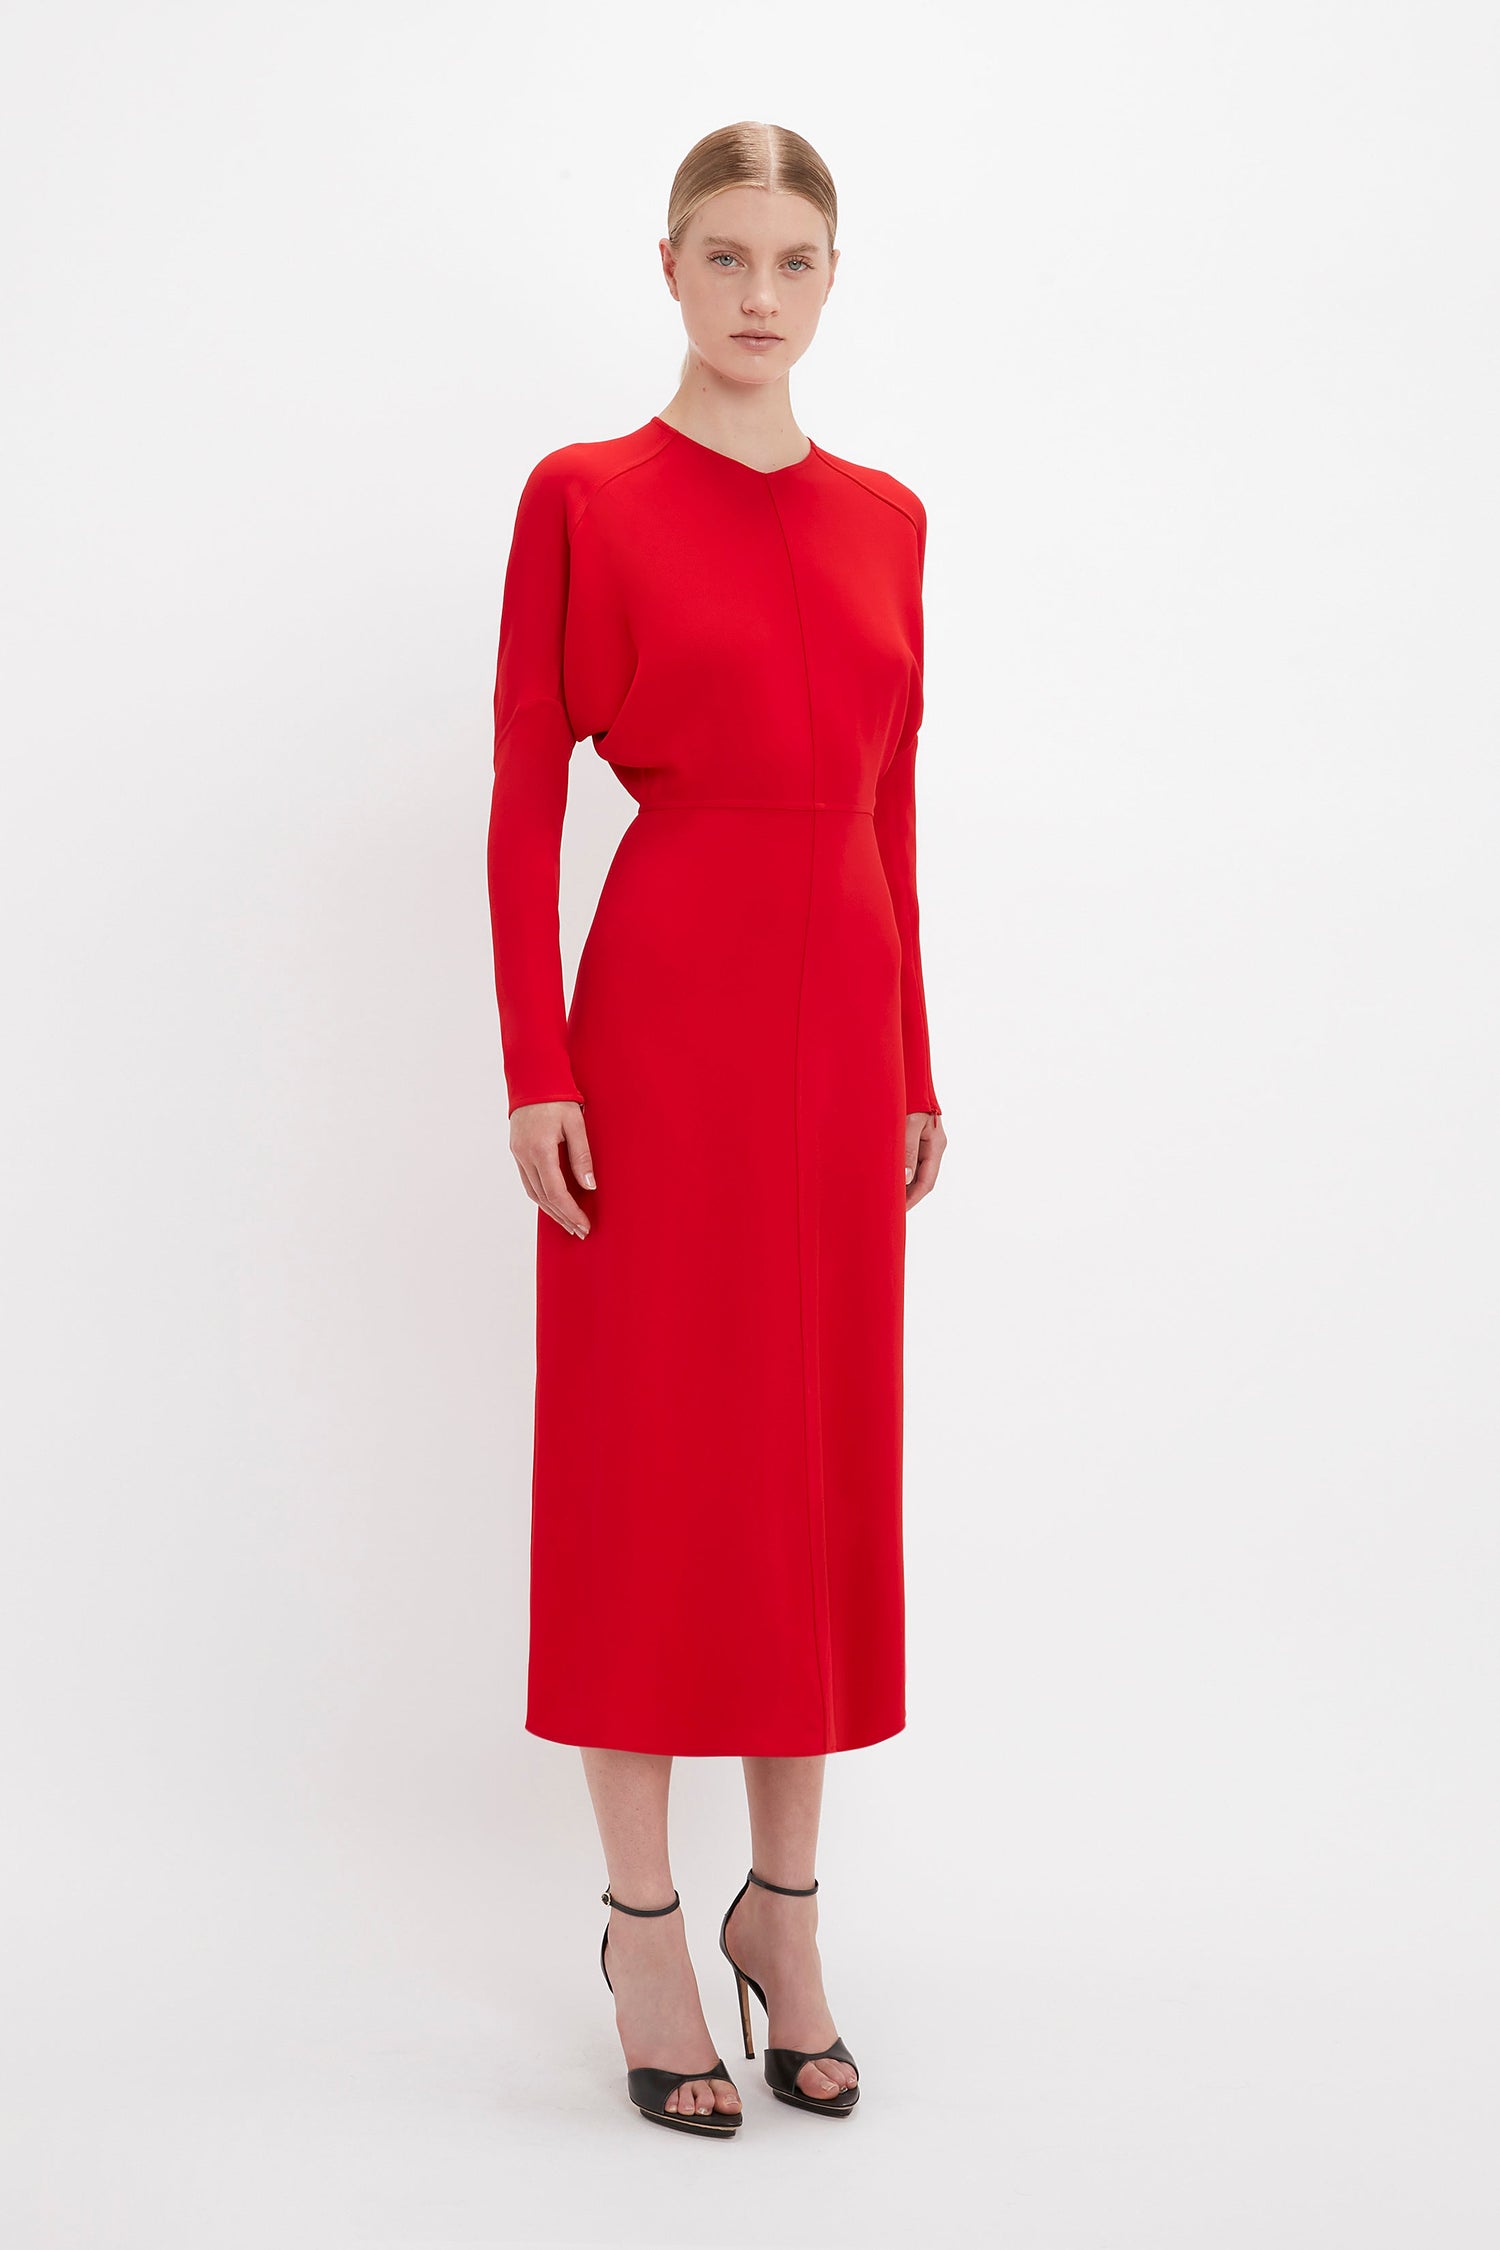 formal midi dress with sleeves